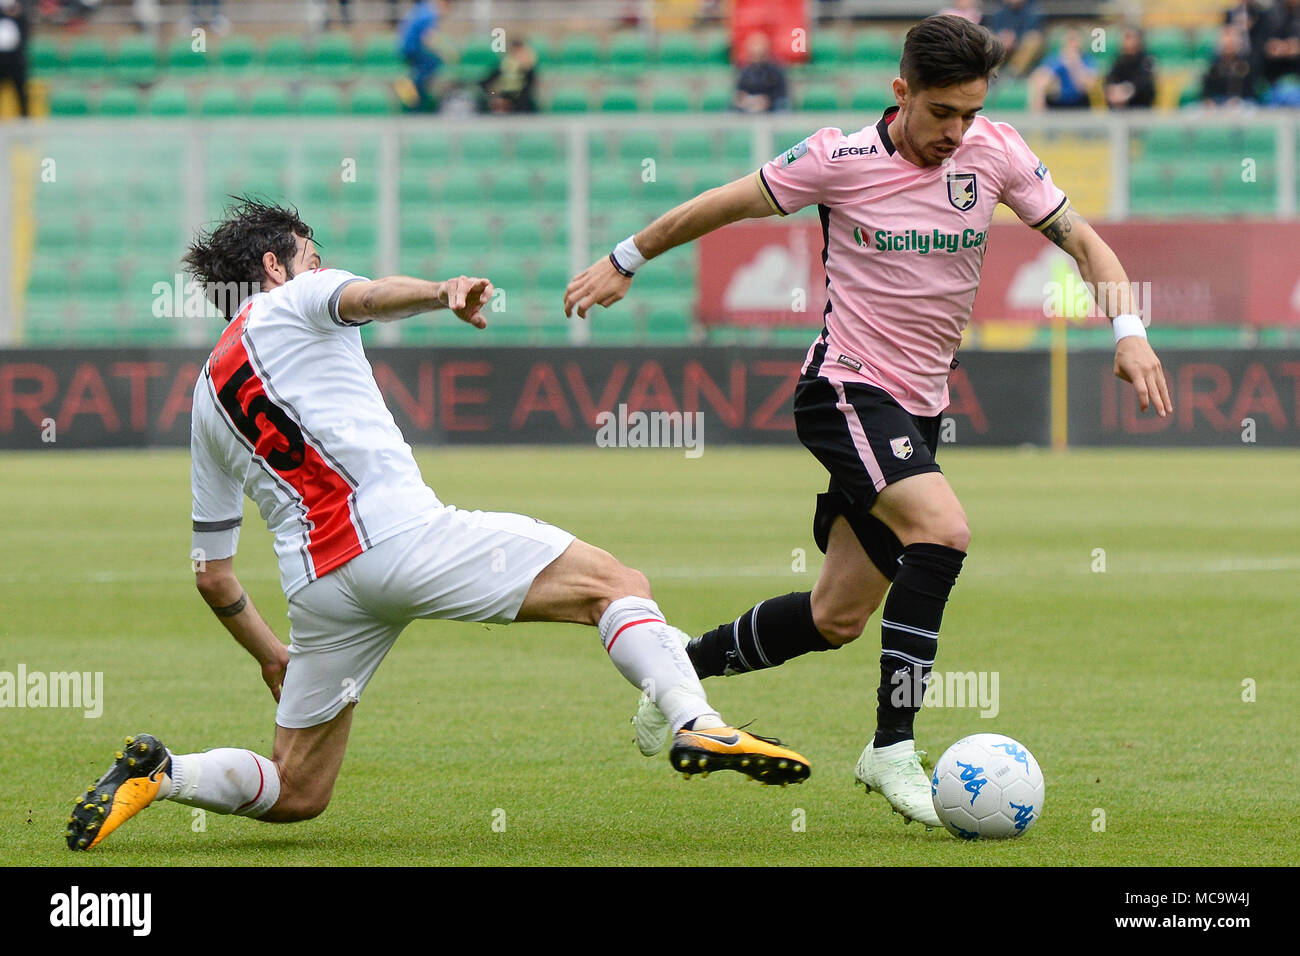 mest prinsesse Videnskab Palermo, Italy. 14th Apr, 2018. PalermoÕs Igor Coronado and CremoneseÕs Daniele  Croce in action during the serie B match between US Citta di Palermo and  Cremonese at Stadio Renzo Barbera on April